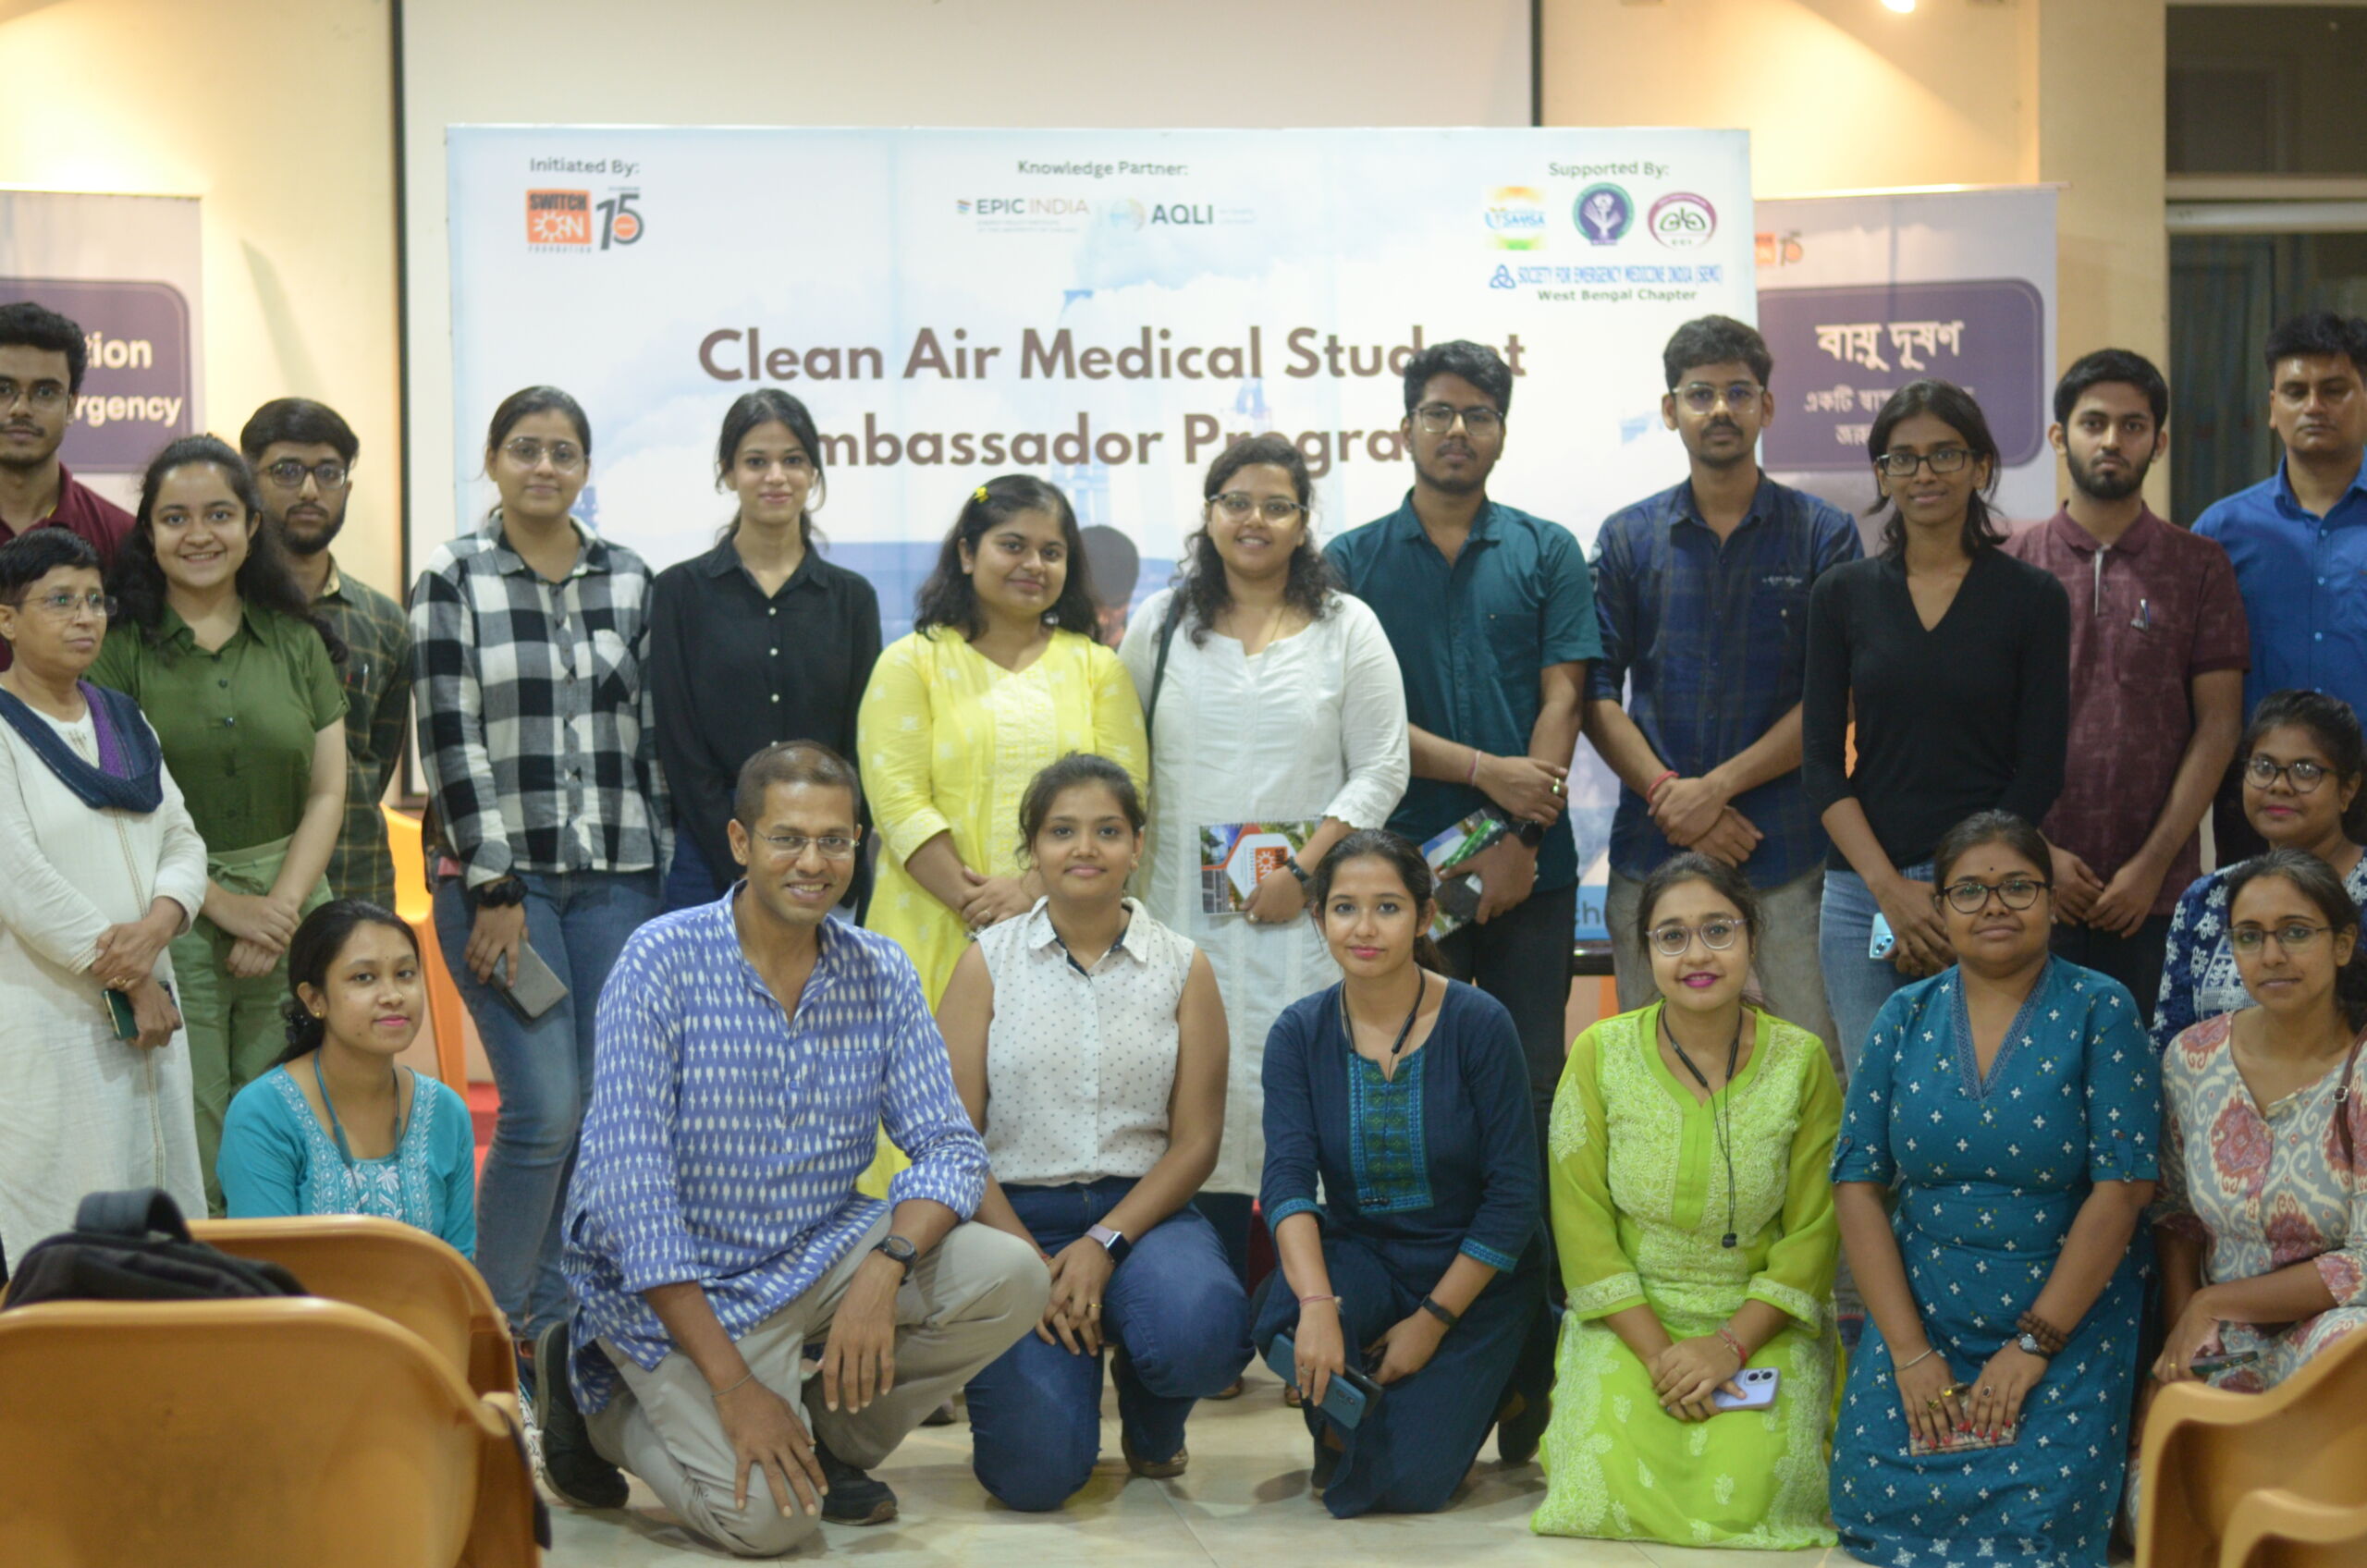 SwitchON Foundation & EPIC India, Chicago form Clean Air Medical Ambassadors to report Climate Change